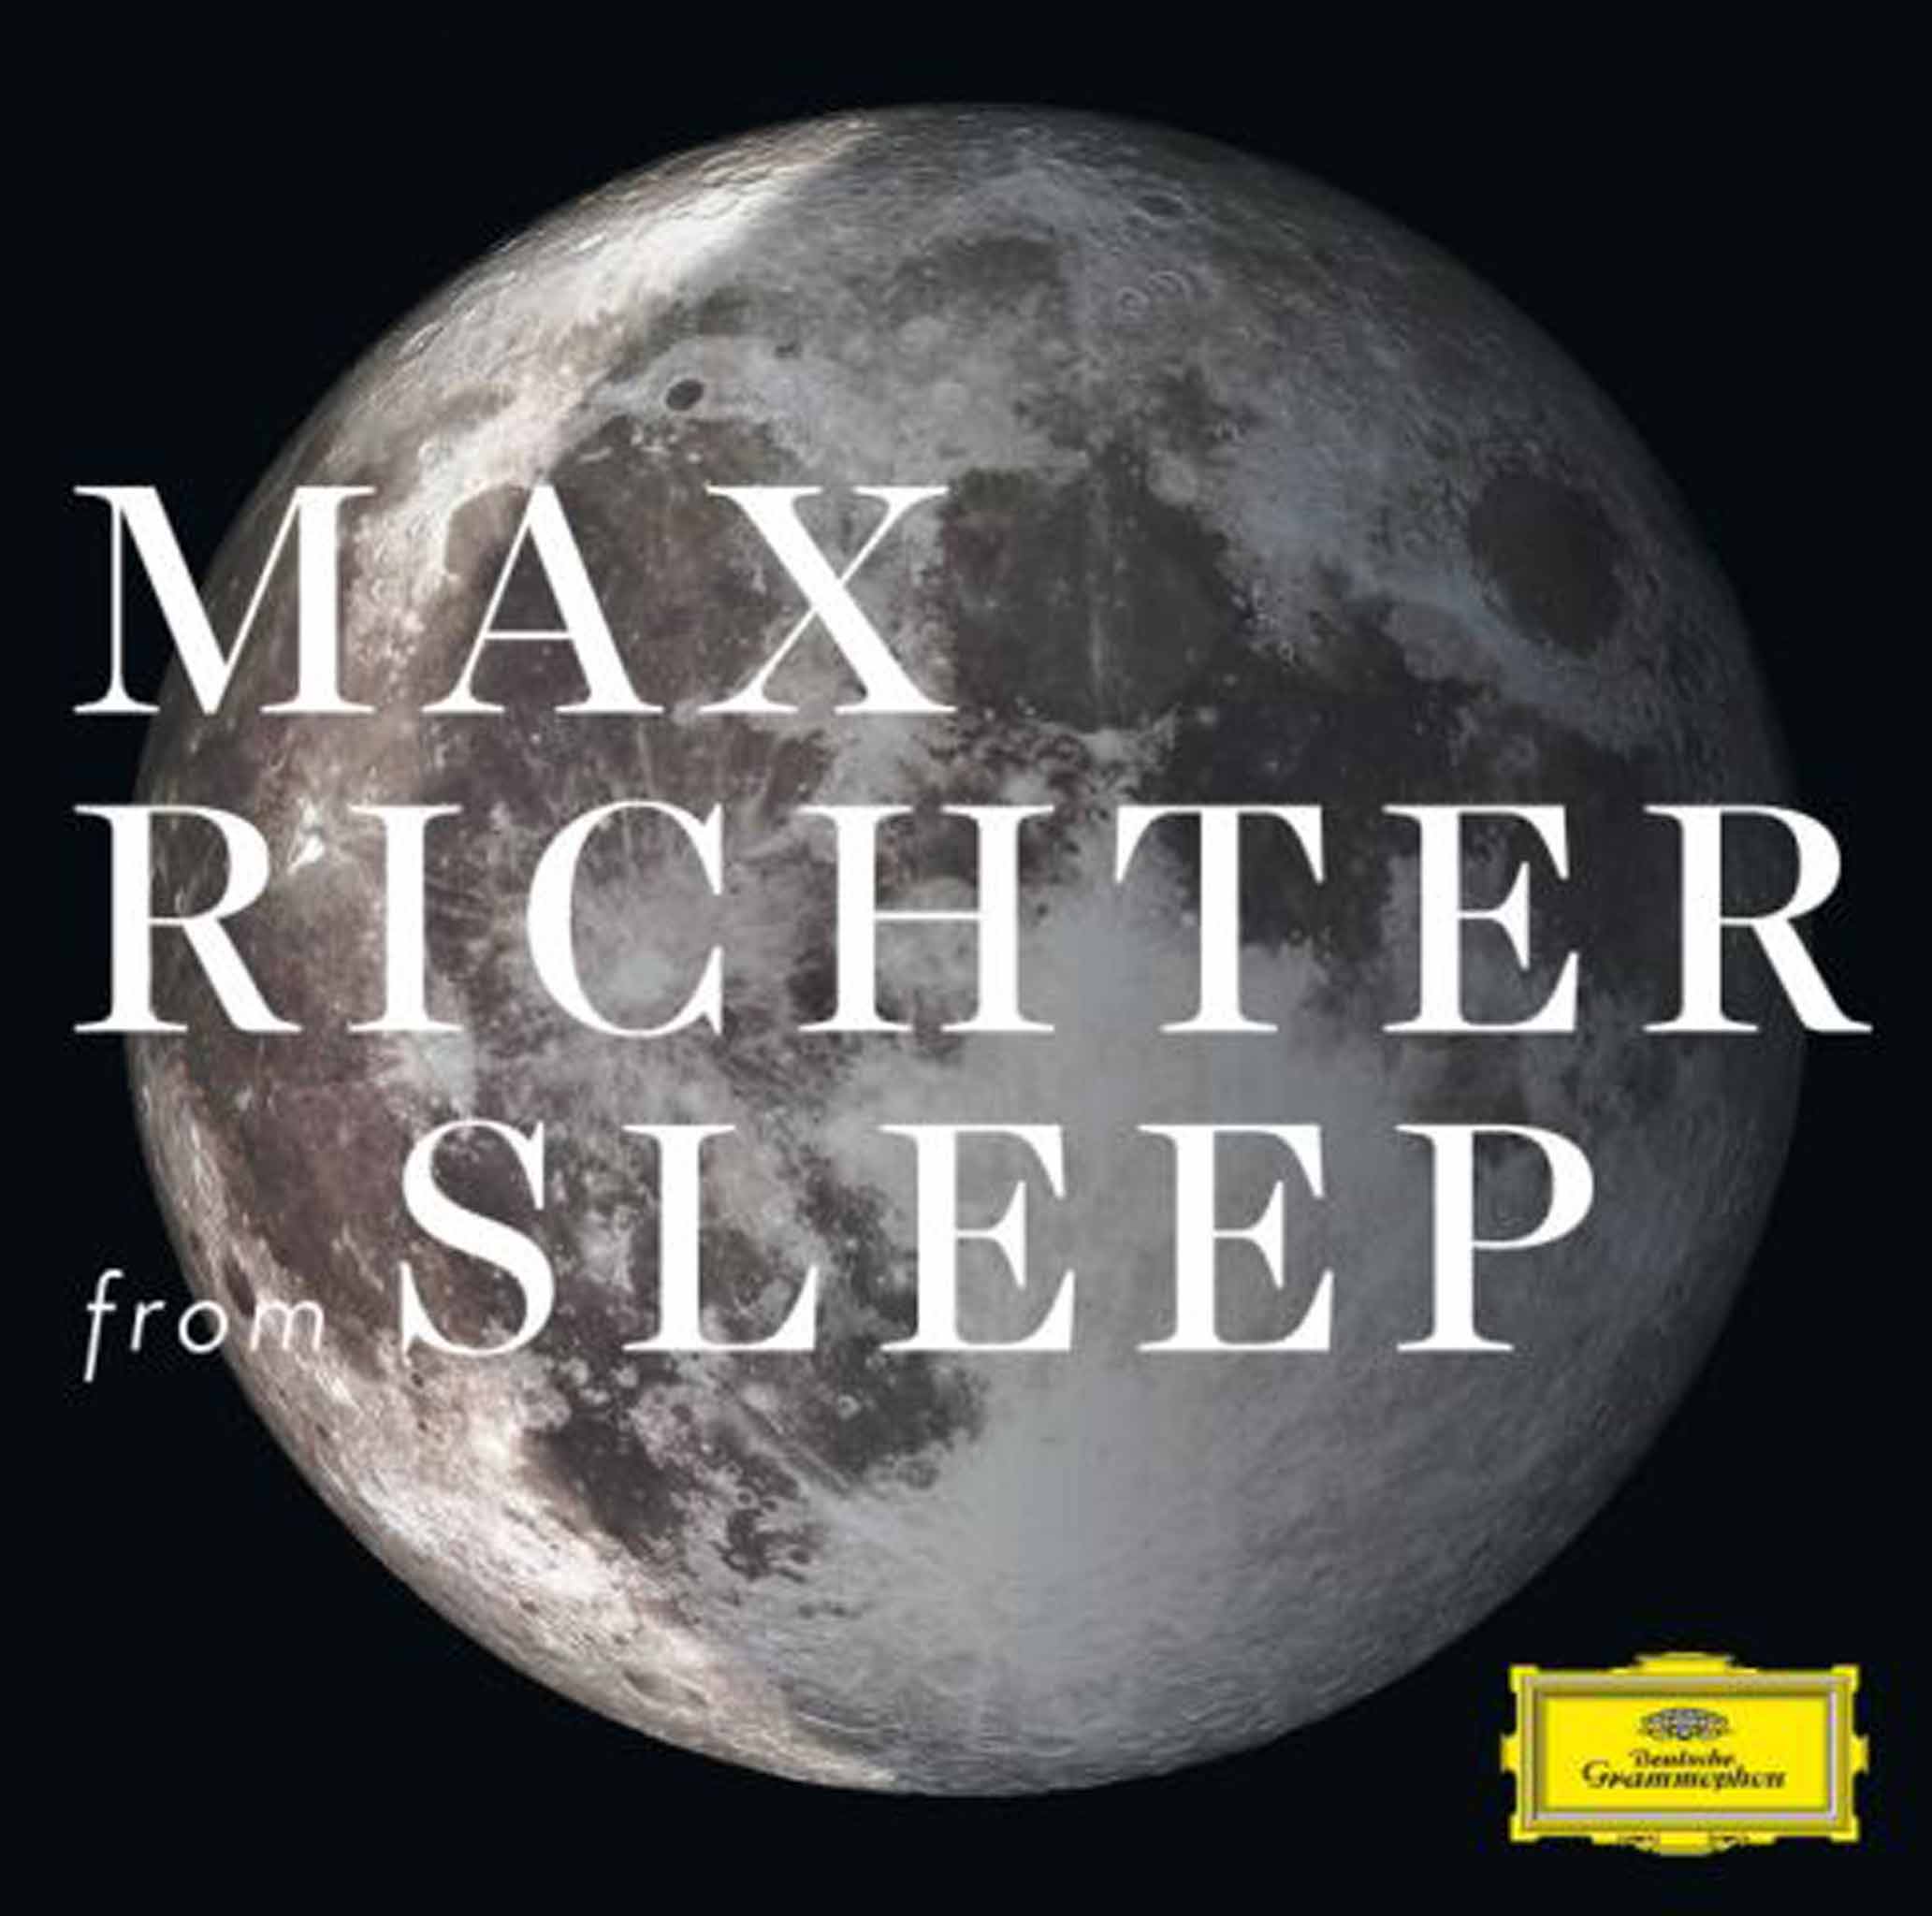 The album cover for the composer's one-hour version of 'Sleep'